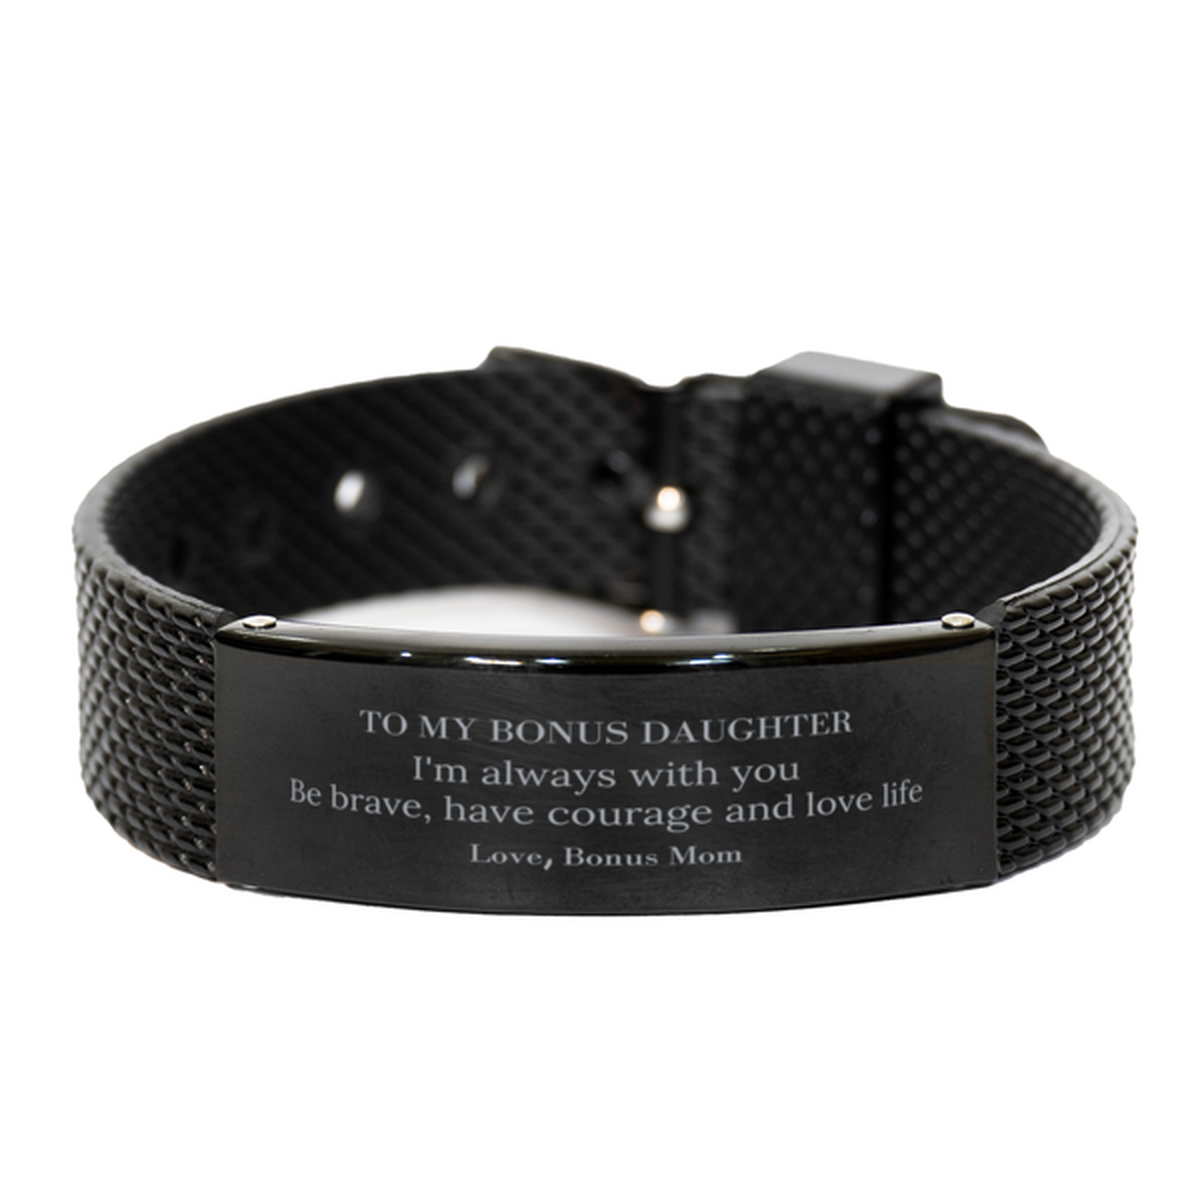 To My Bonus Daughter Gifts from Bonus Mom, Unique Black Shark Mesh Bracelet Inspirational Christmas Birthday Graduation Gifts for Bonus Daughter I'm always with you. Be brave, have courage and love life. Love, Bonus Mom